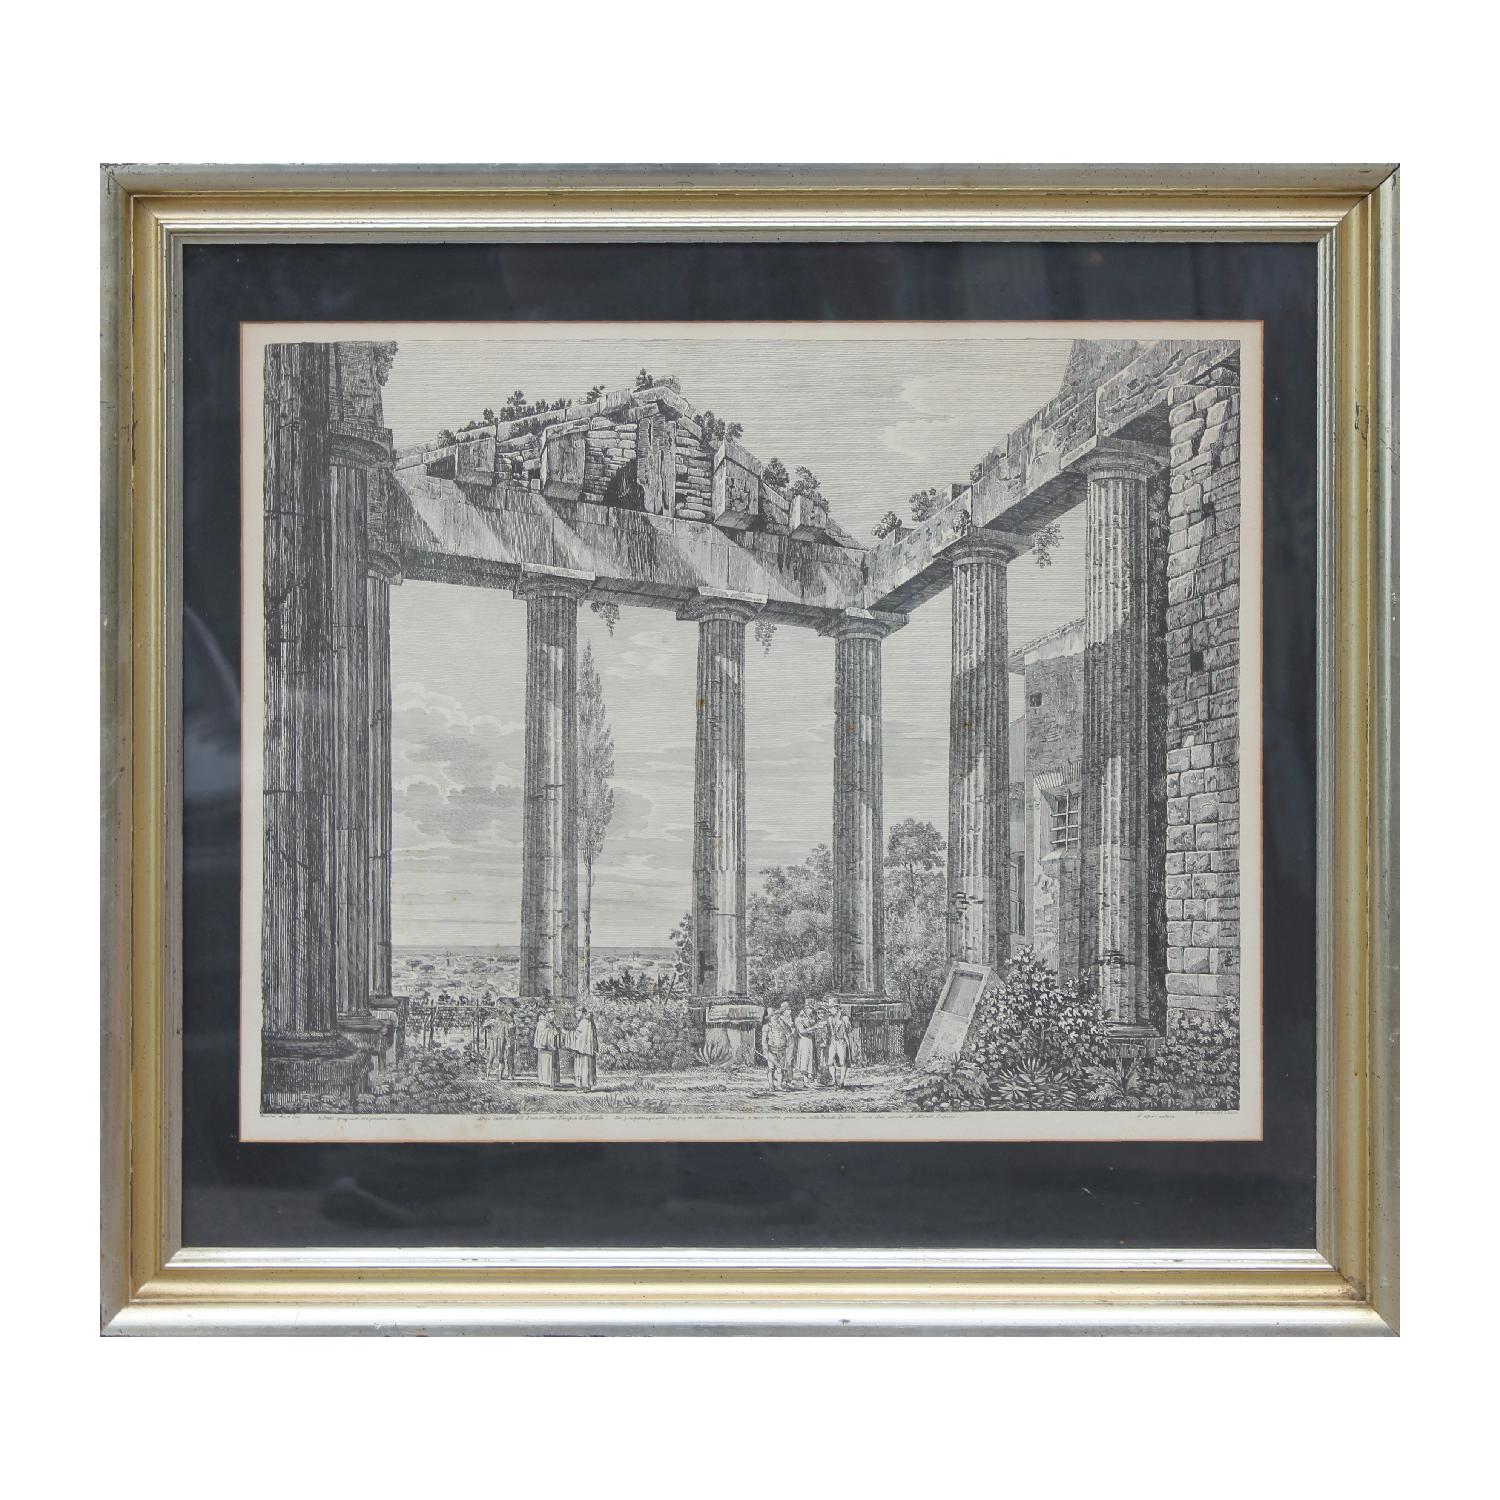 Set of 3 Etchings of Roman / Italian Architectural Landscapes - Print by Luigi Rossini